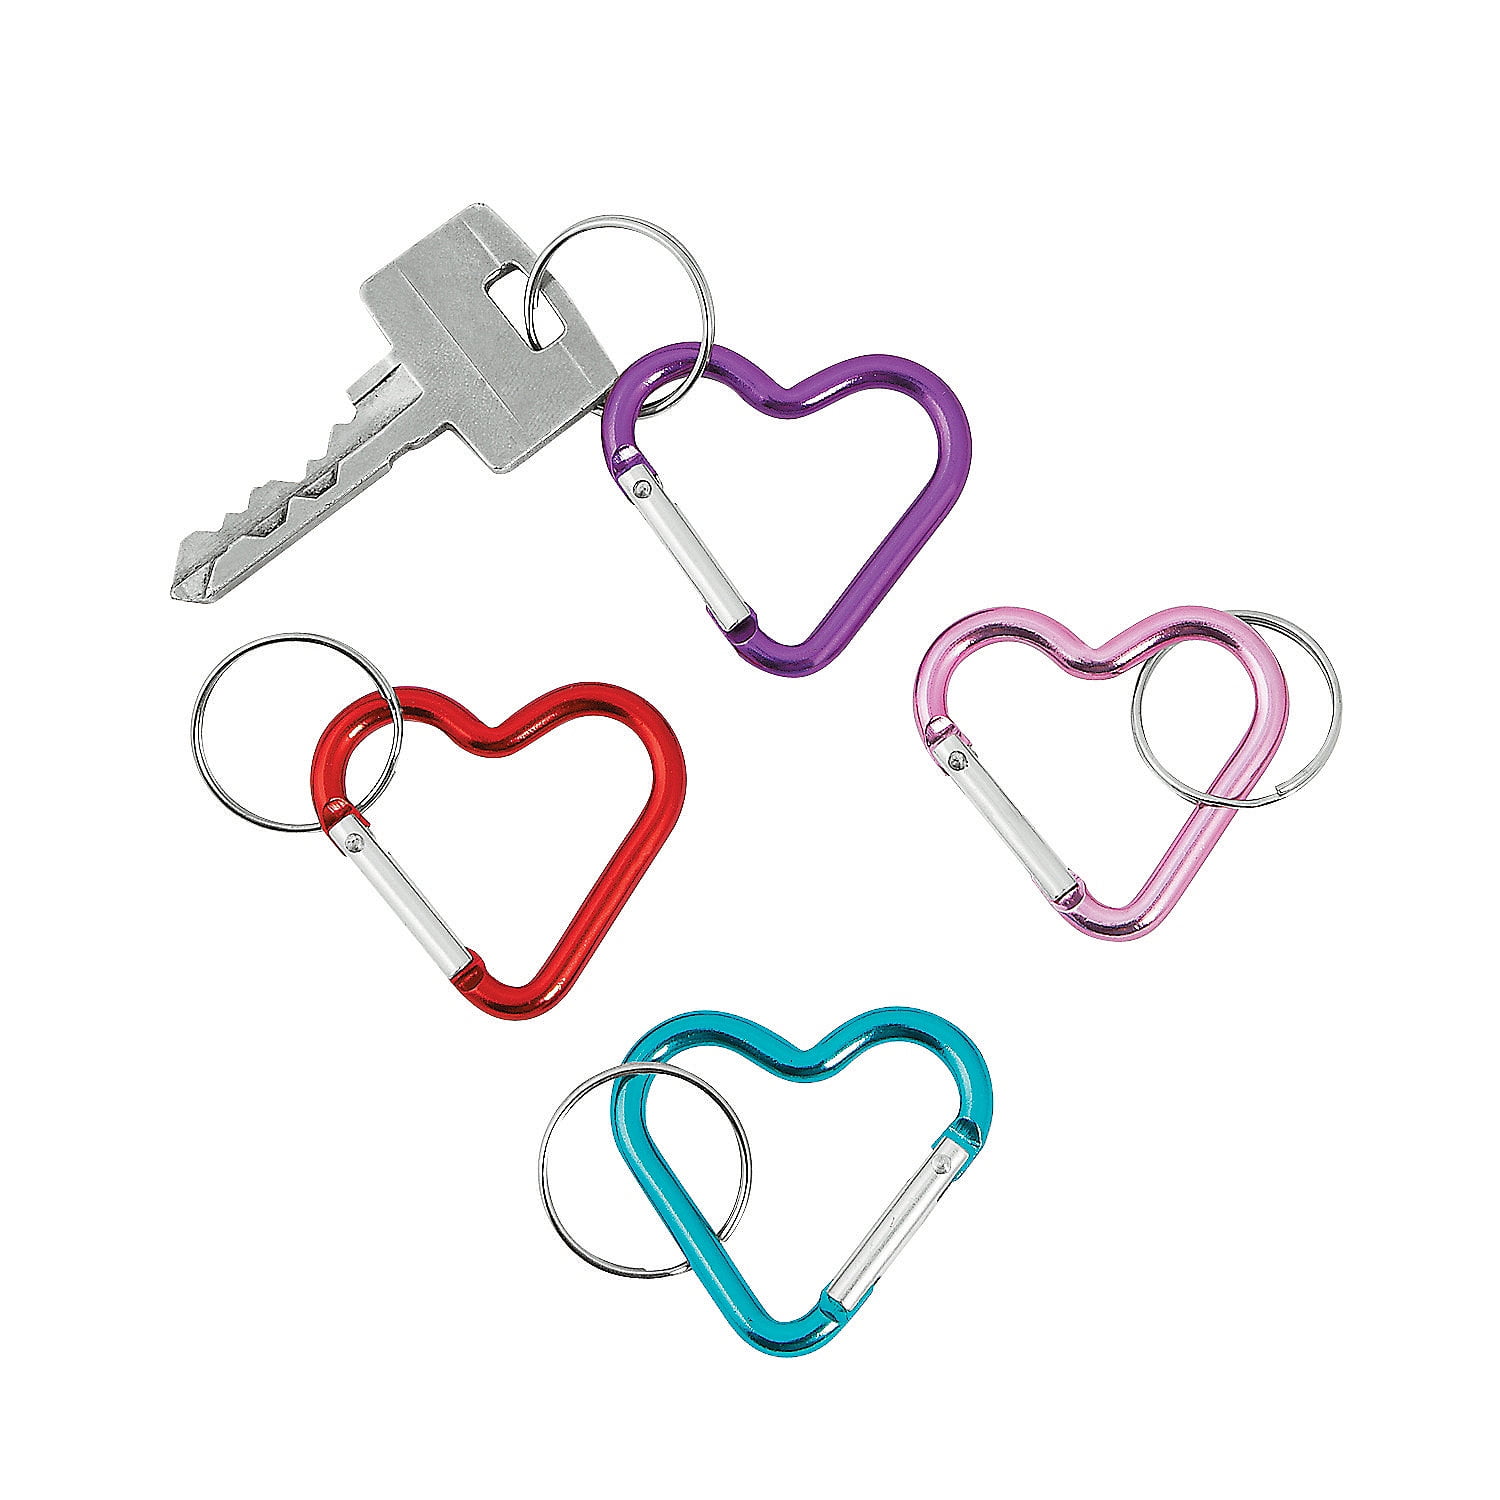 2Pcs Outdoor Aluminum Heart-Shaped Carabiner Key Chain Clip Hook Backpack Buckle 